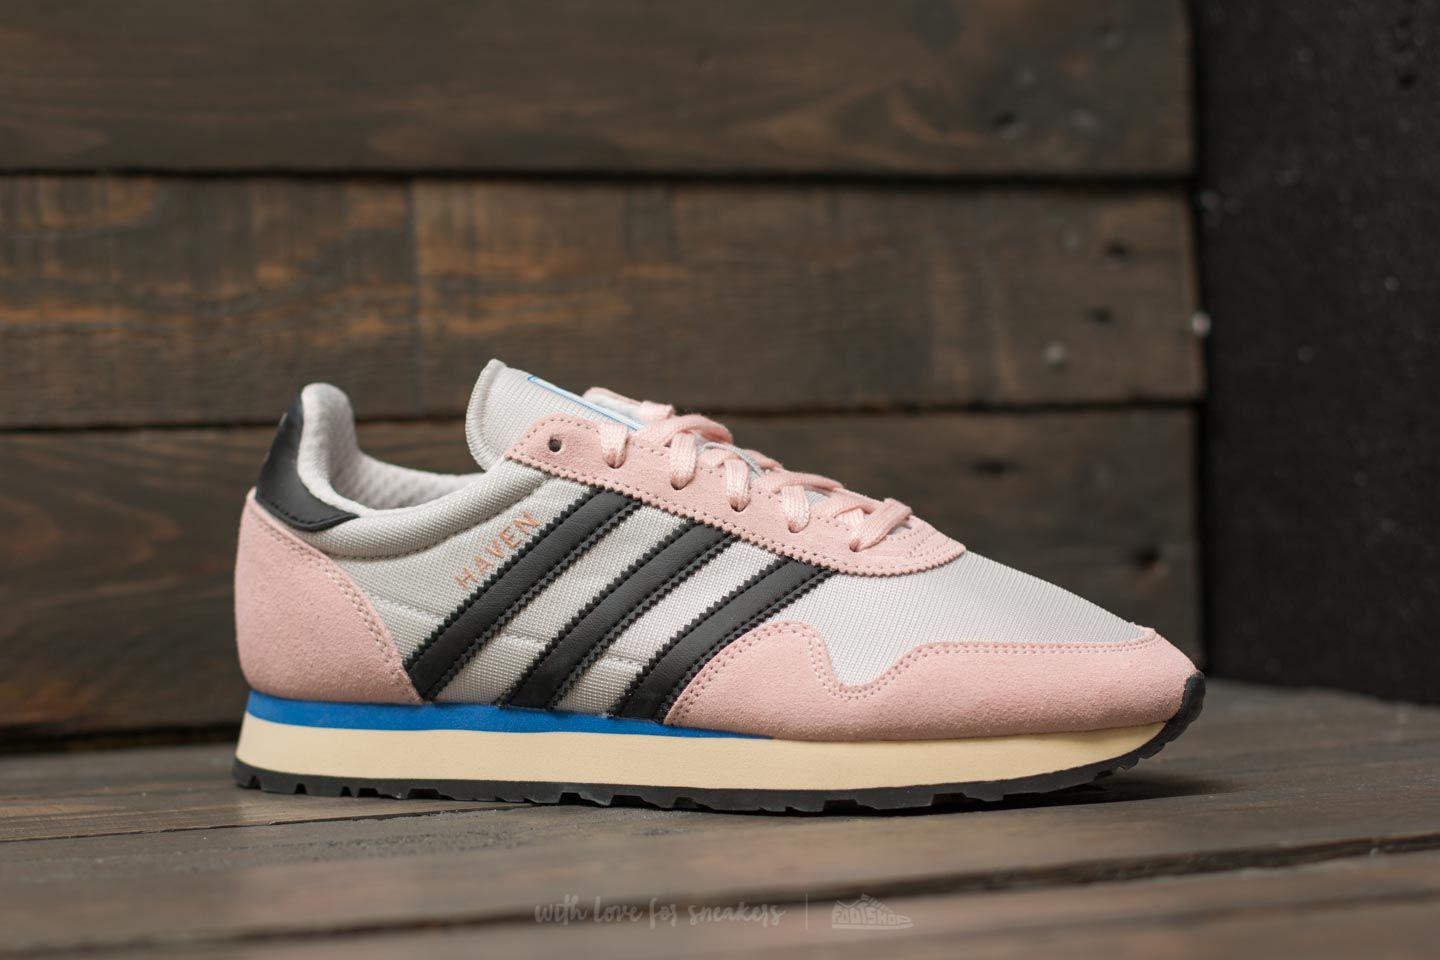 adidas Originals Rubber Adidas Haven W Grey One/ Core Black/ Ice Pink - Lyst